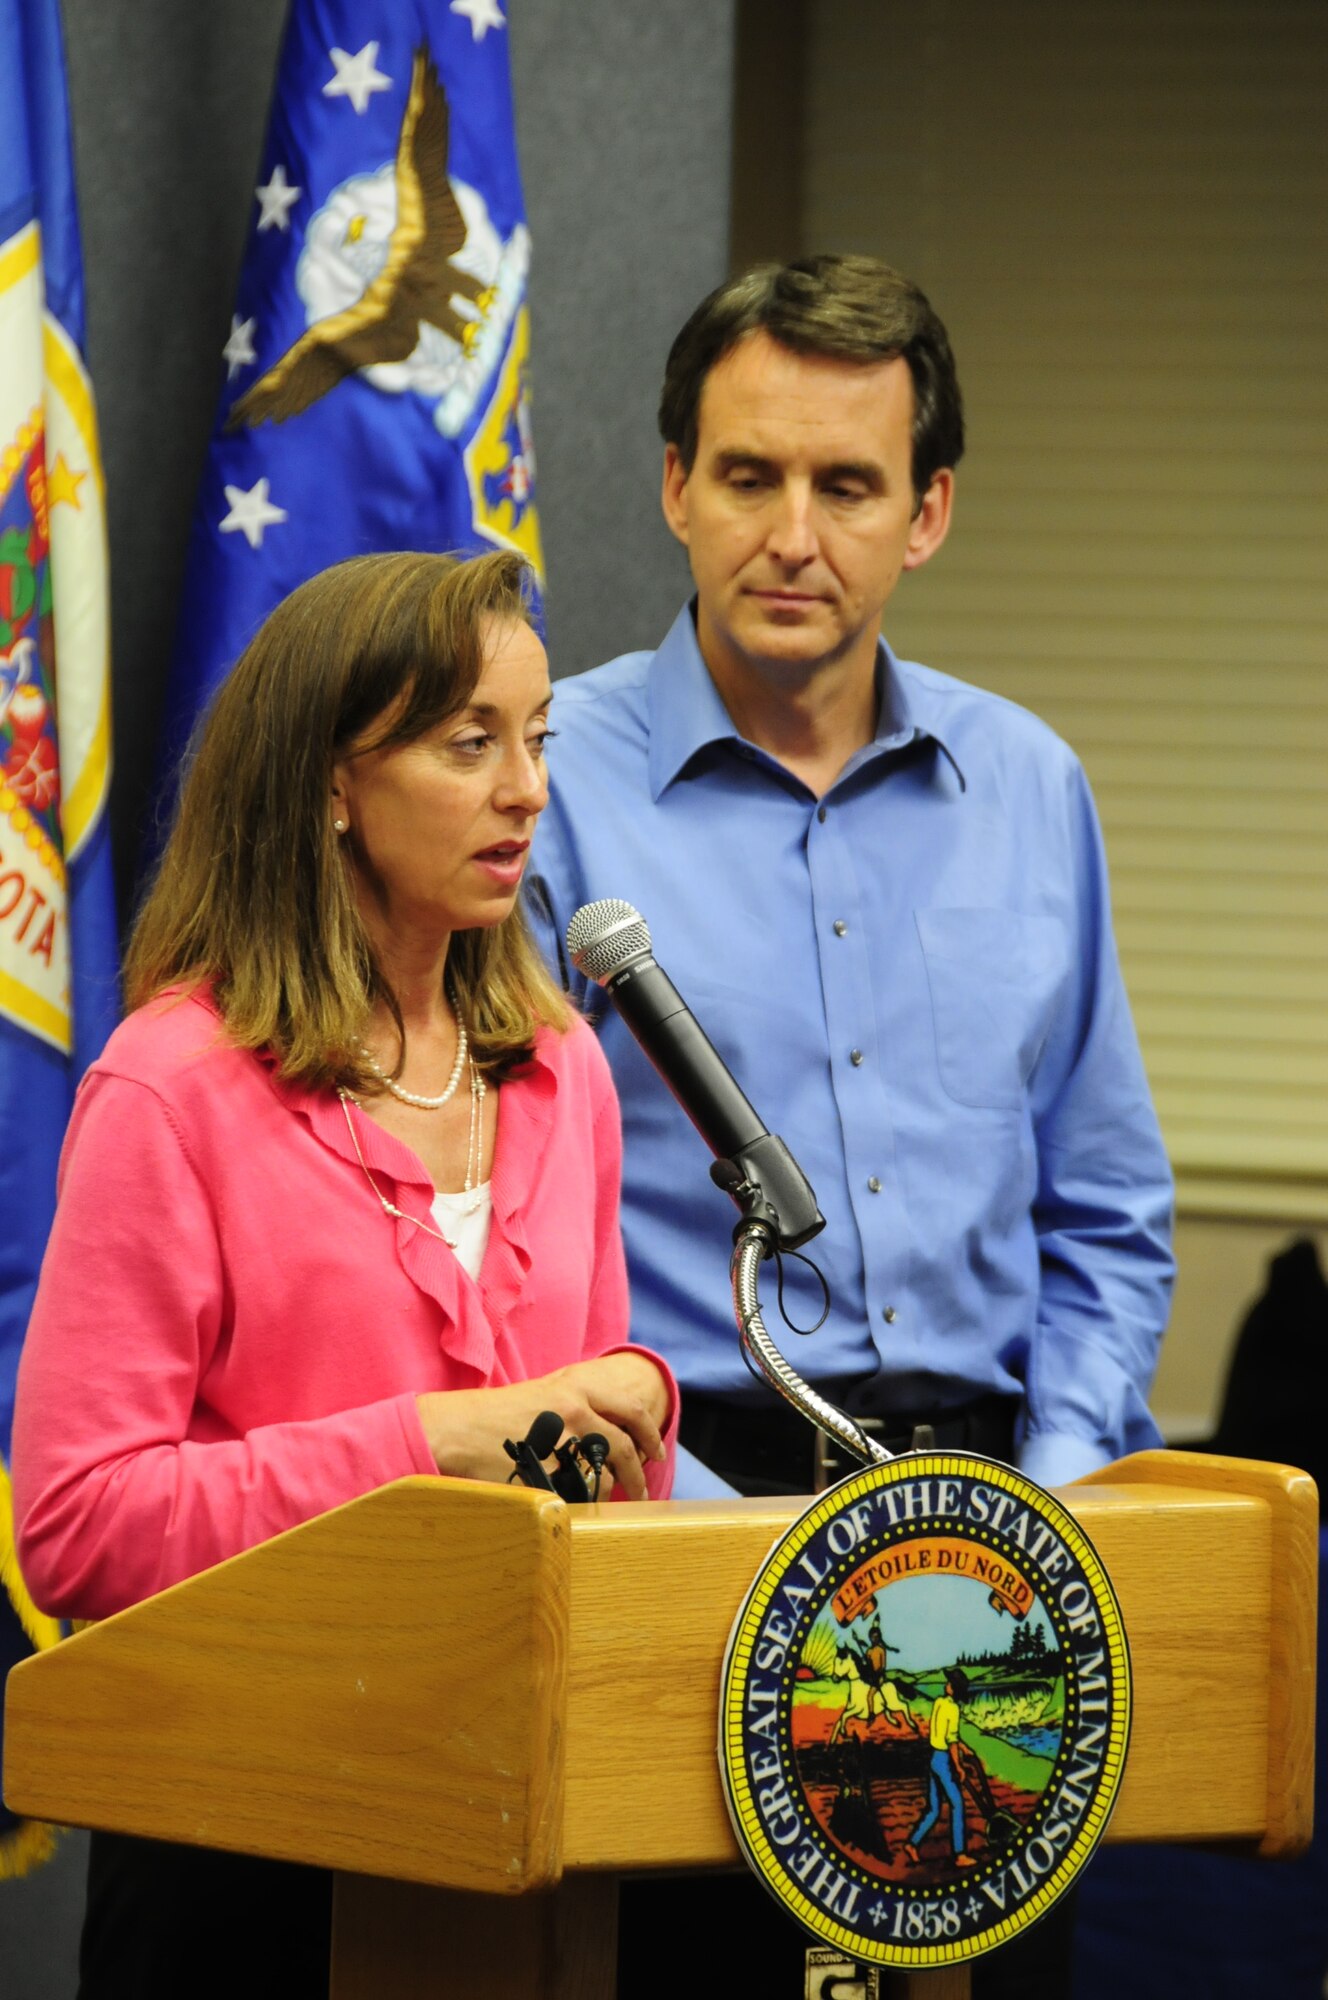 Minnesota Governor Tim Pawlenty and First Lady Mary Pawlenty speak to military members, family and community leaders at the 148th Fighter Wing Air National Guard Base in Duluth, Minn. July 28, 2010. Governor Pawlenty and the First Lady arrived at the 148th to announce that the First Lady’s Military Family Care Initiative will continue and expand to provide additional assistance to military families under the National Guard’s Beyond the Yellow Ribbon Program. (Air National Guard photo by Tech. Sgt. Amie M. Dahl)           